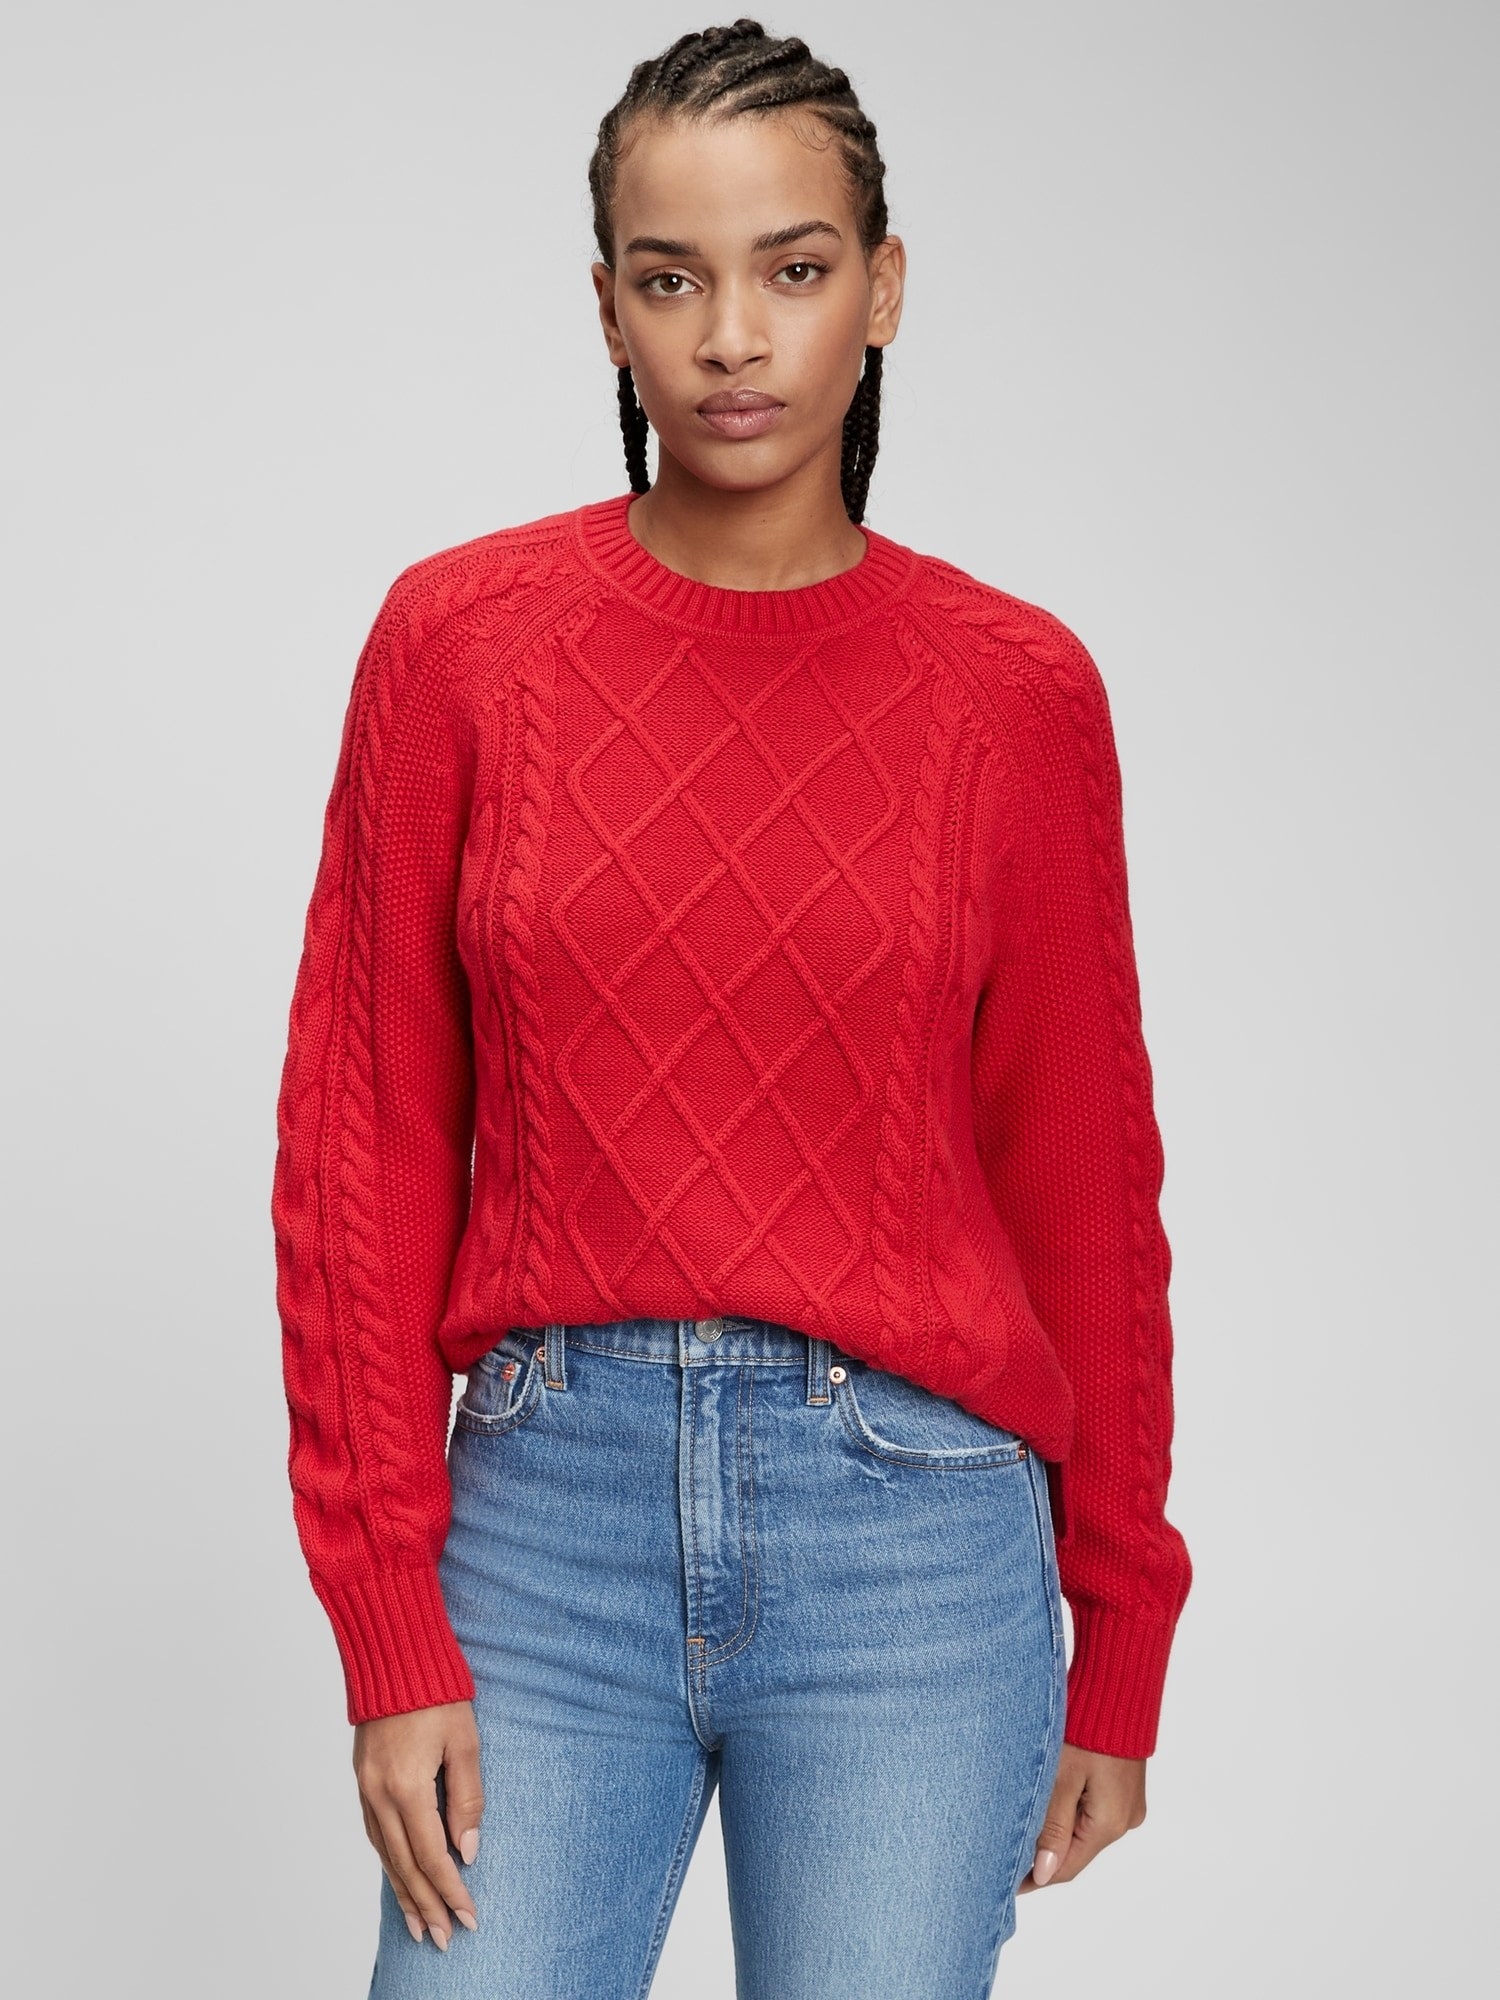 model wearing a red cable knit sweater with light blue jeans